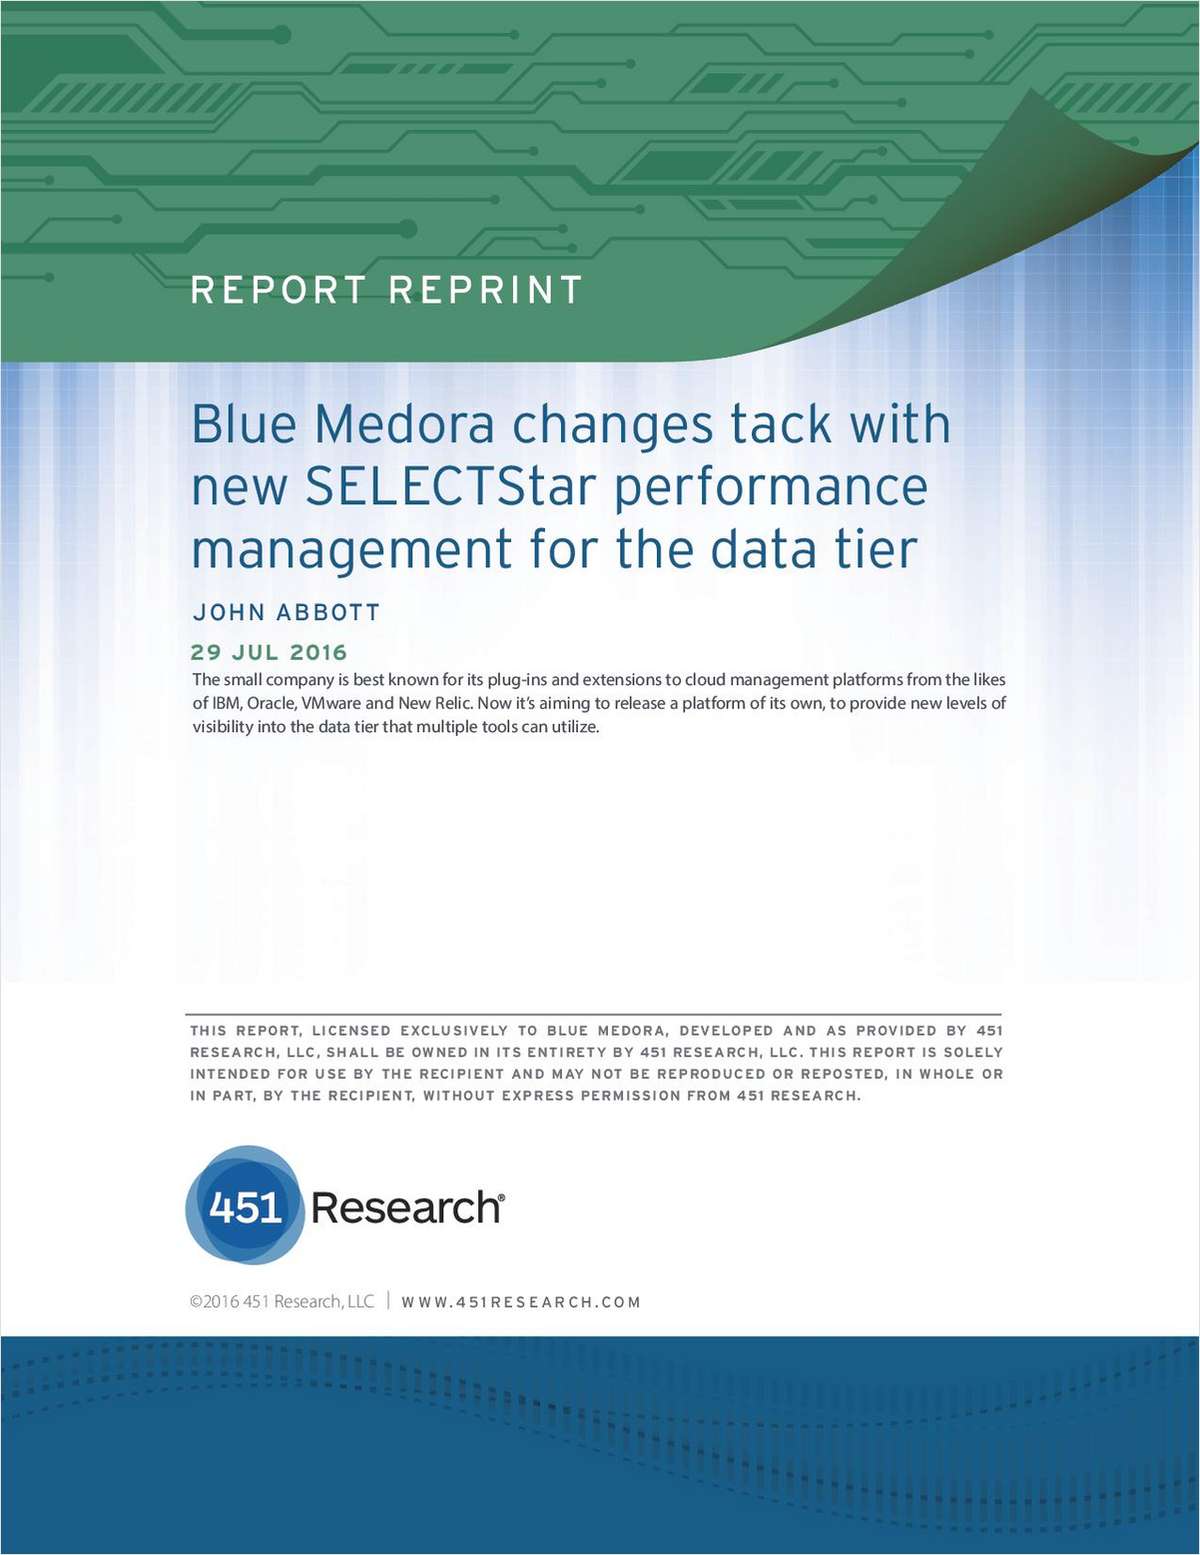 Blue Medora Changes Tack With New SELECTStar Performance Management for the Data Tier